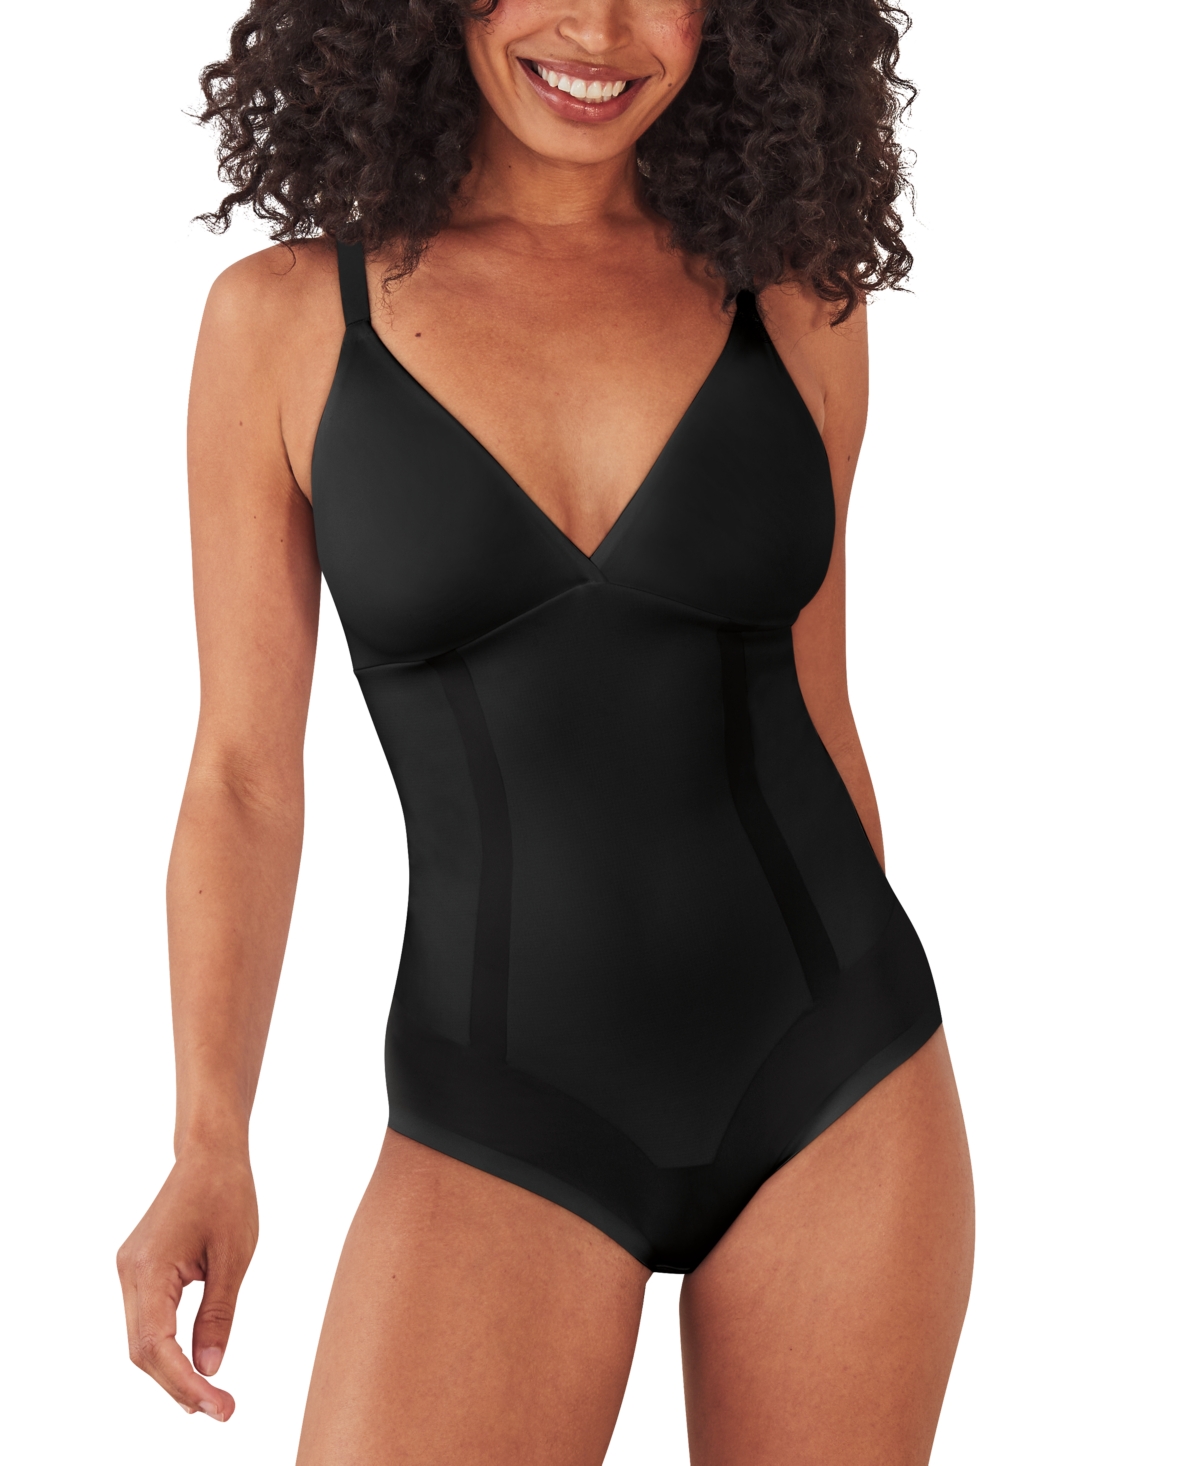 Women's Ultimate Smoothing Firm Control Bodysuit DFS105 - Black